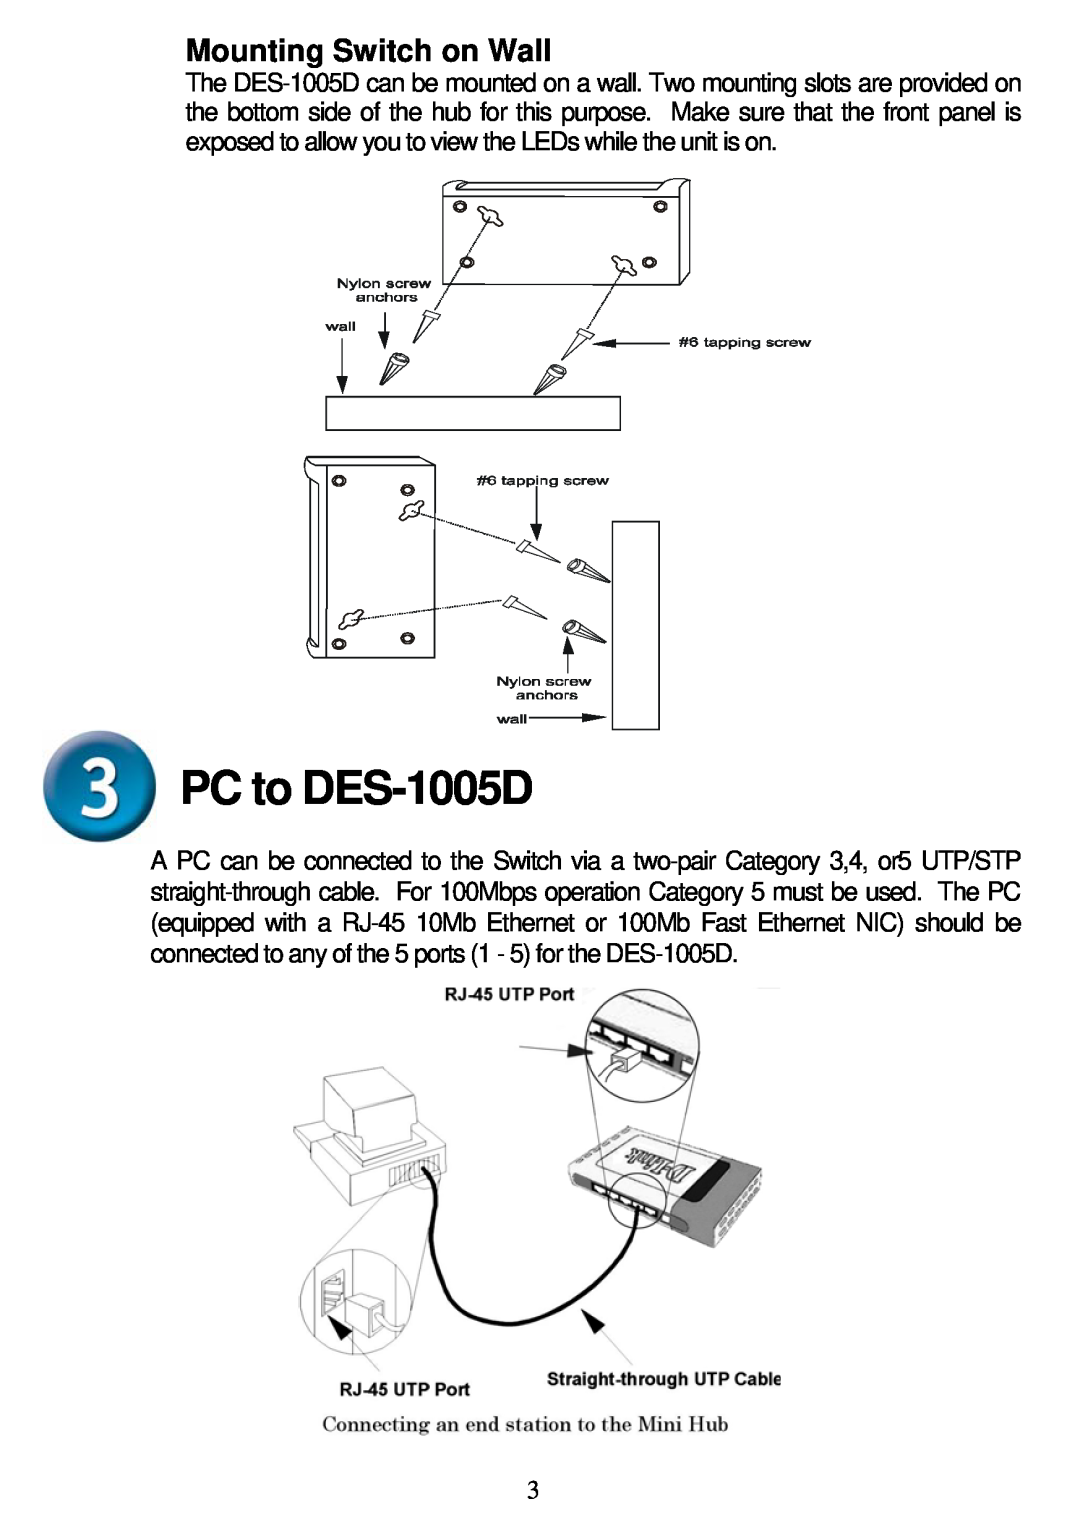 D-Link technical specifications PC to DES-1005D, Mounting Switch on Wall 